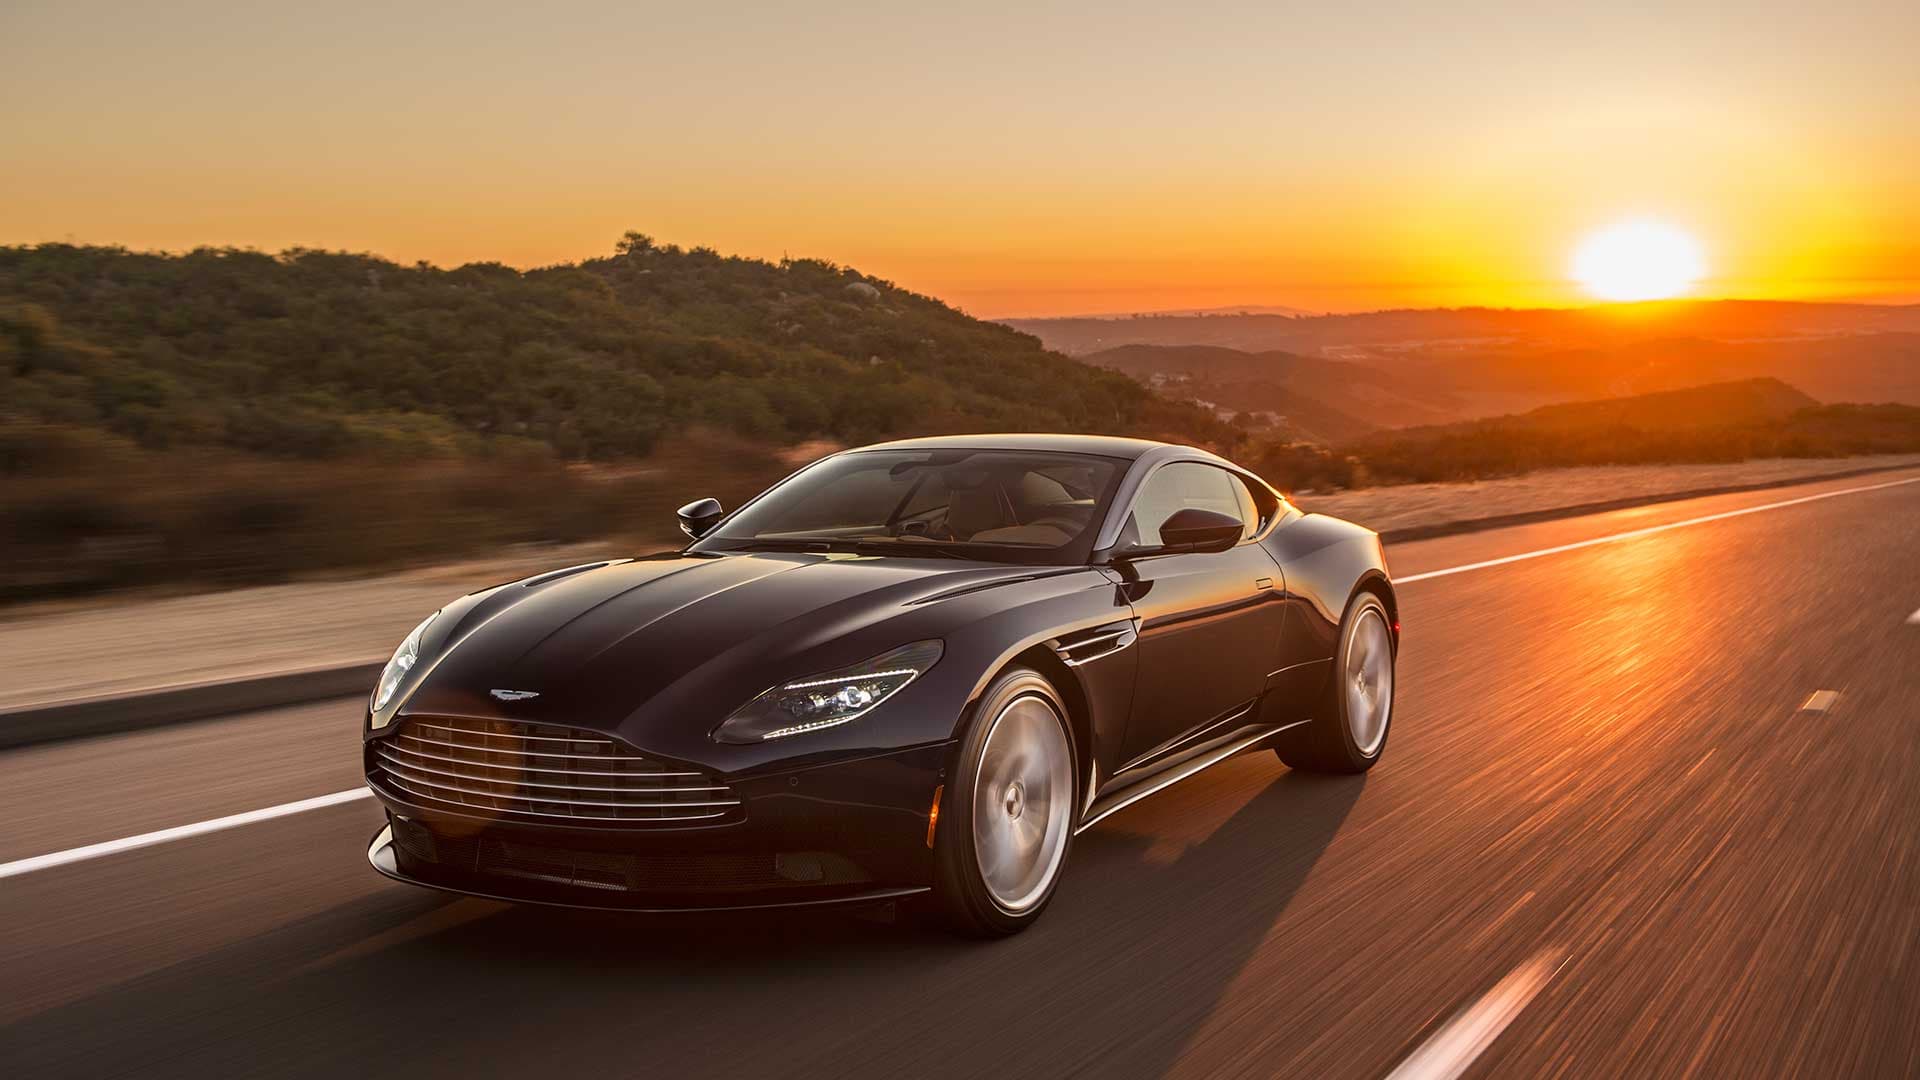 Aston Martin to File for Initial Public Offering: Report